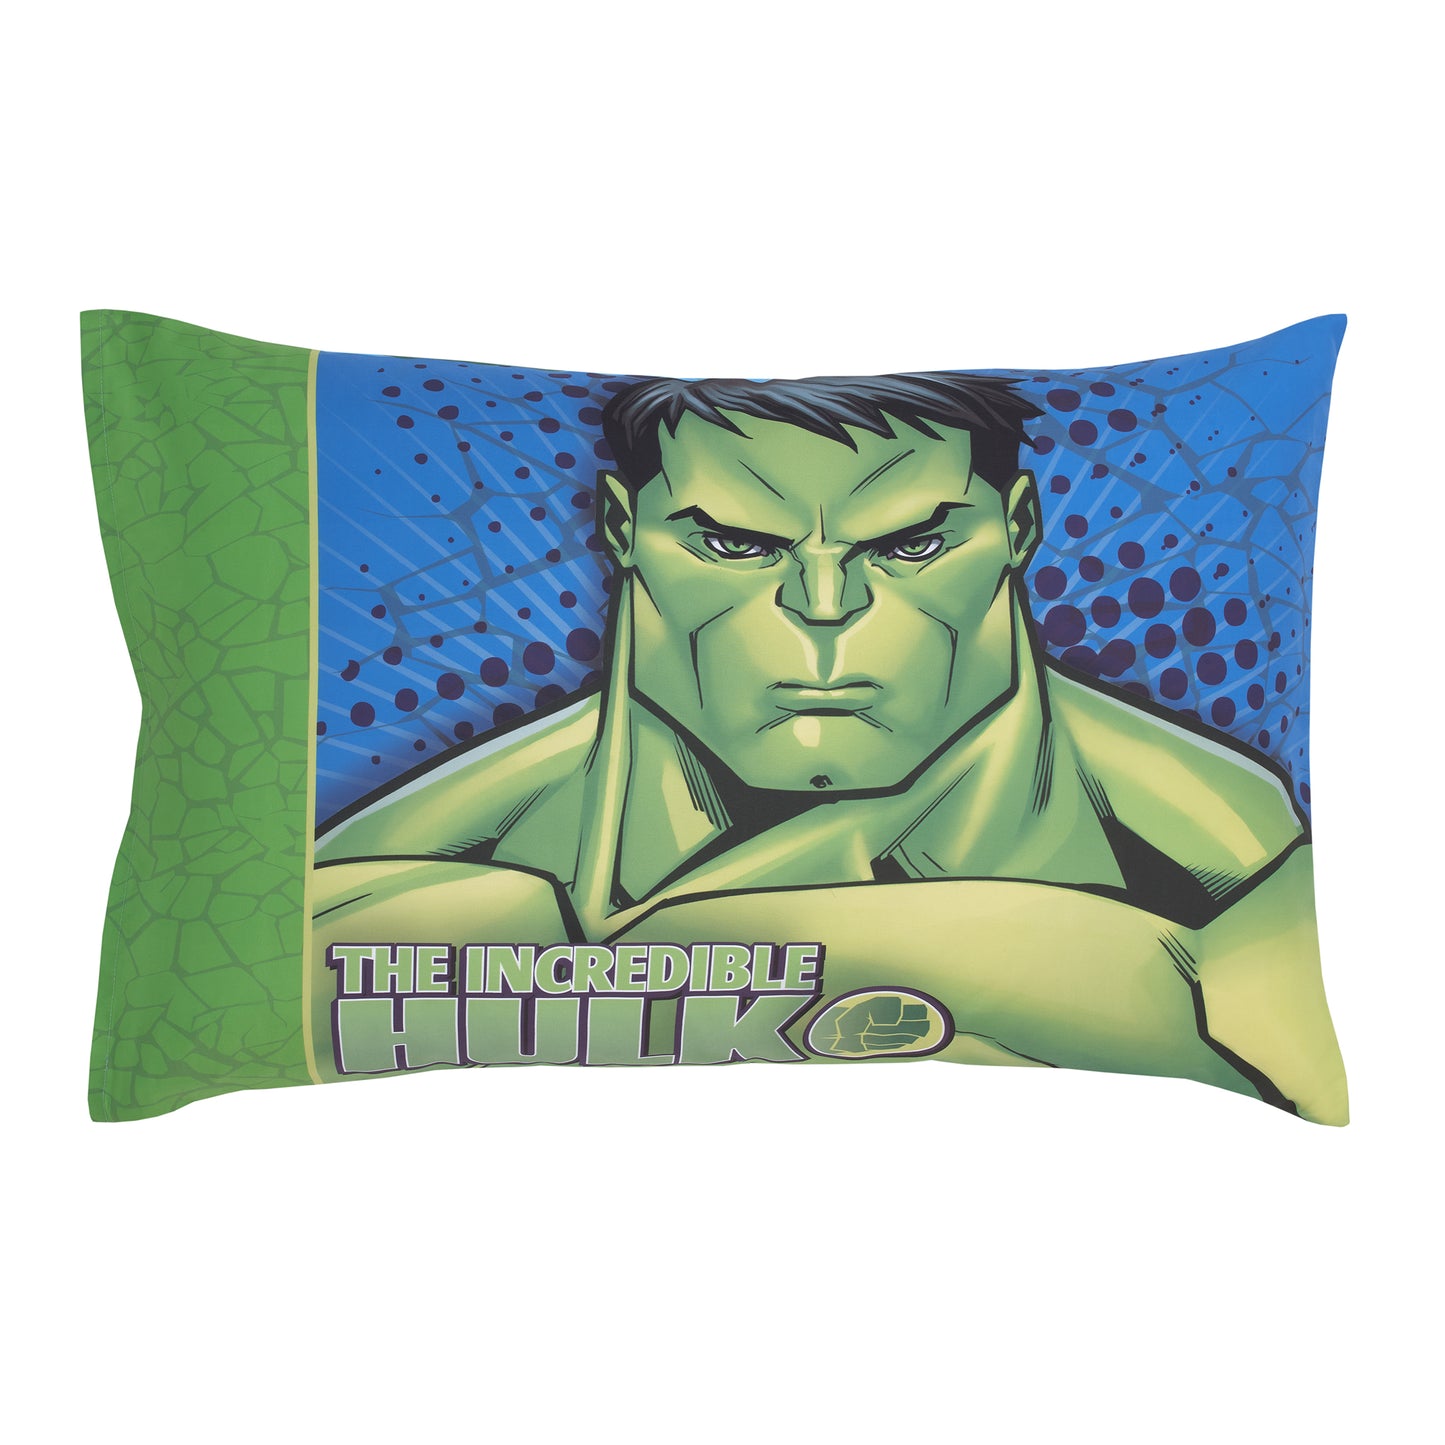 Marvel The Incredible Hulk Green, and Blue 4 Piece Toddler Bed Set - Comforter, Fitted Bottom Sheet, Flat Top Sheet, and Reversible Pillowcase